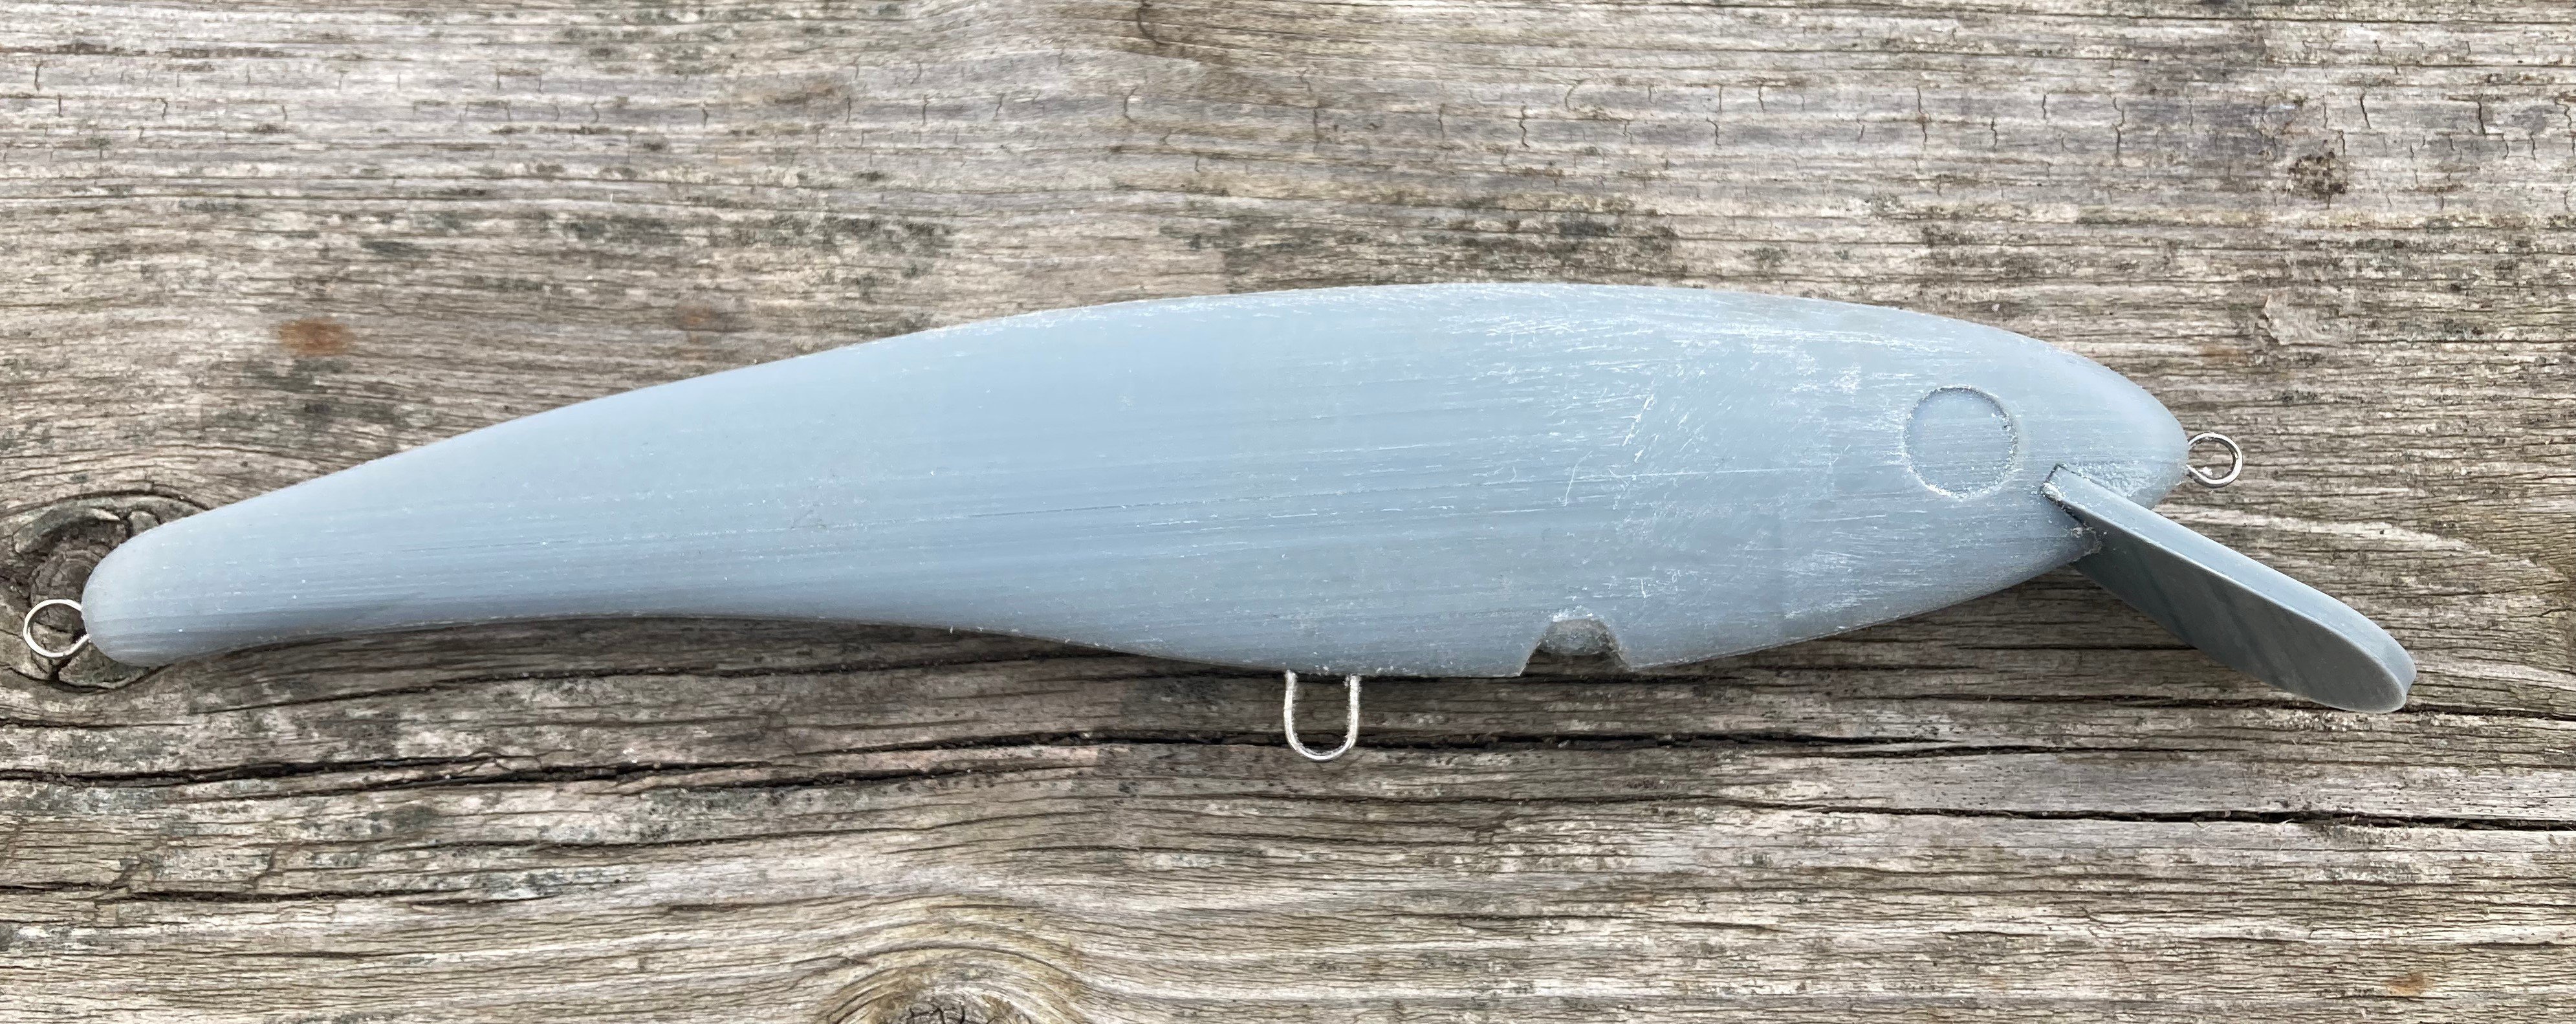 How to Duplicate a Fishing Lure in CAD for 3D Printing (Step 1 of 4) 